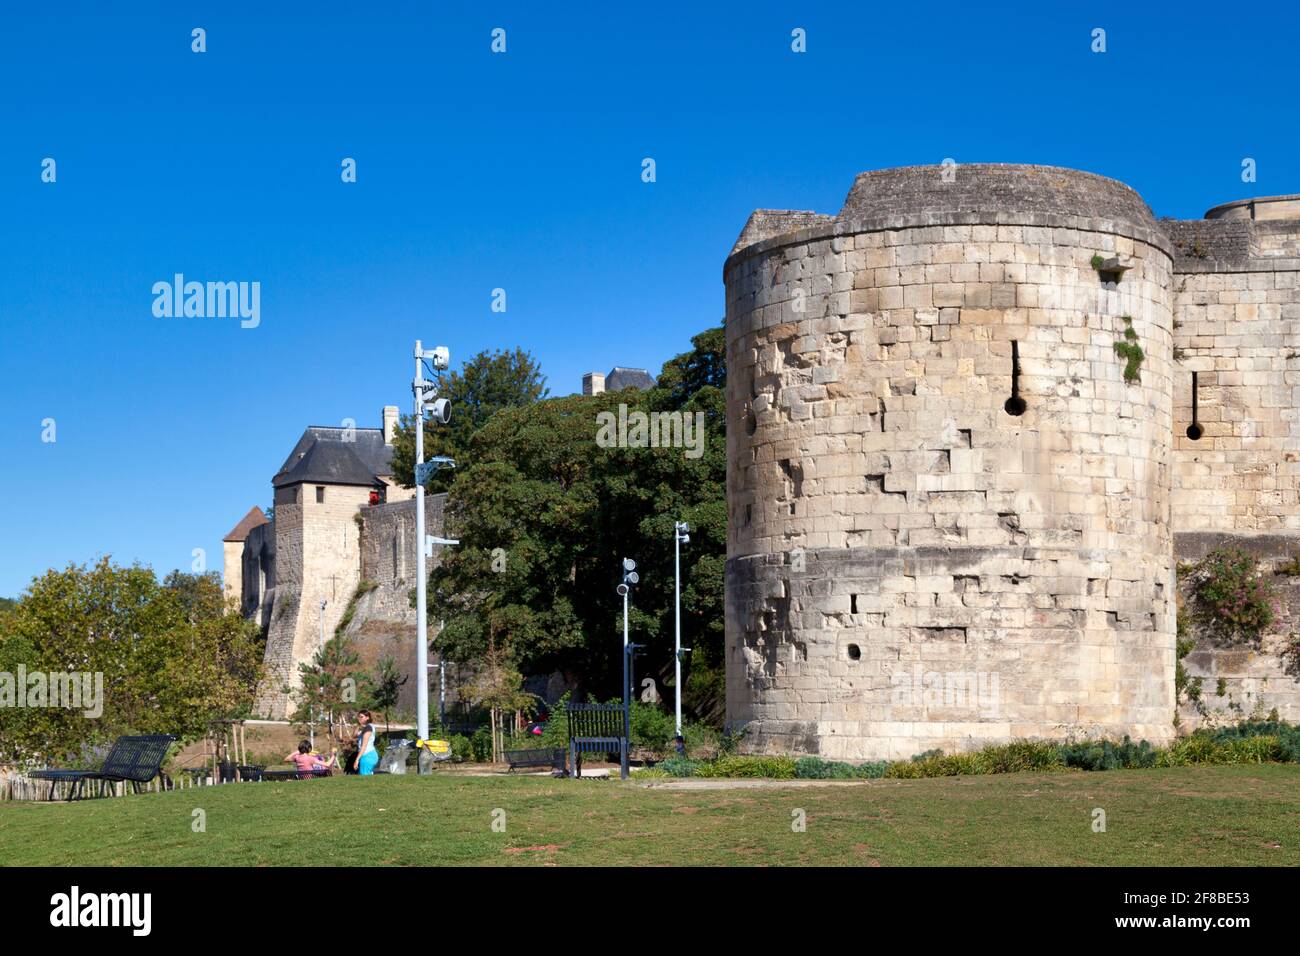 Caen, France - August 06 2020: Rampart surrounding the castle of Caen. Stock Photo